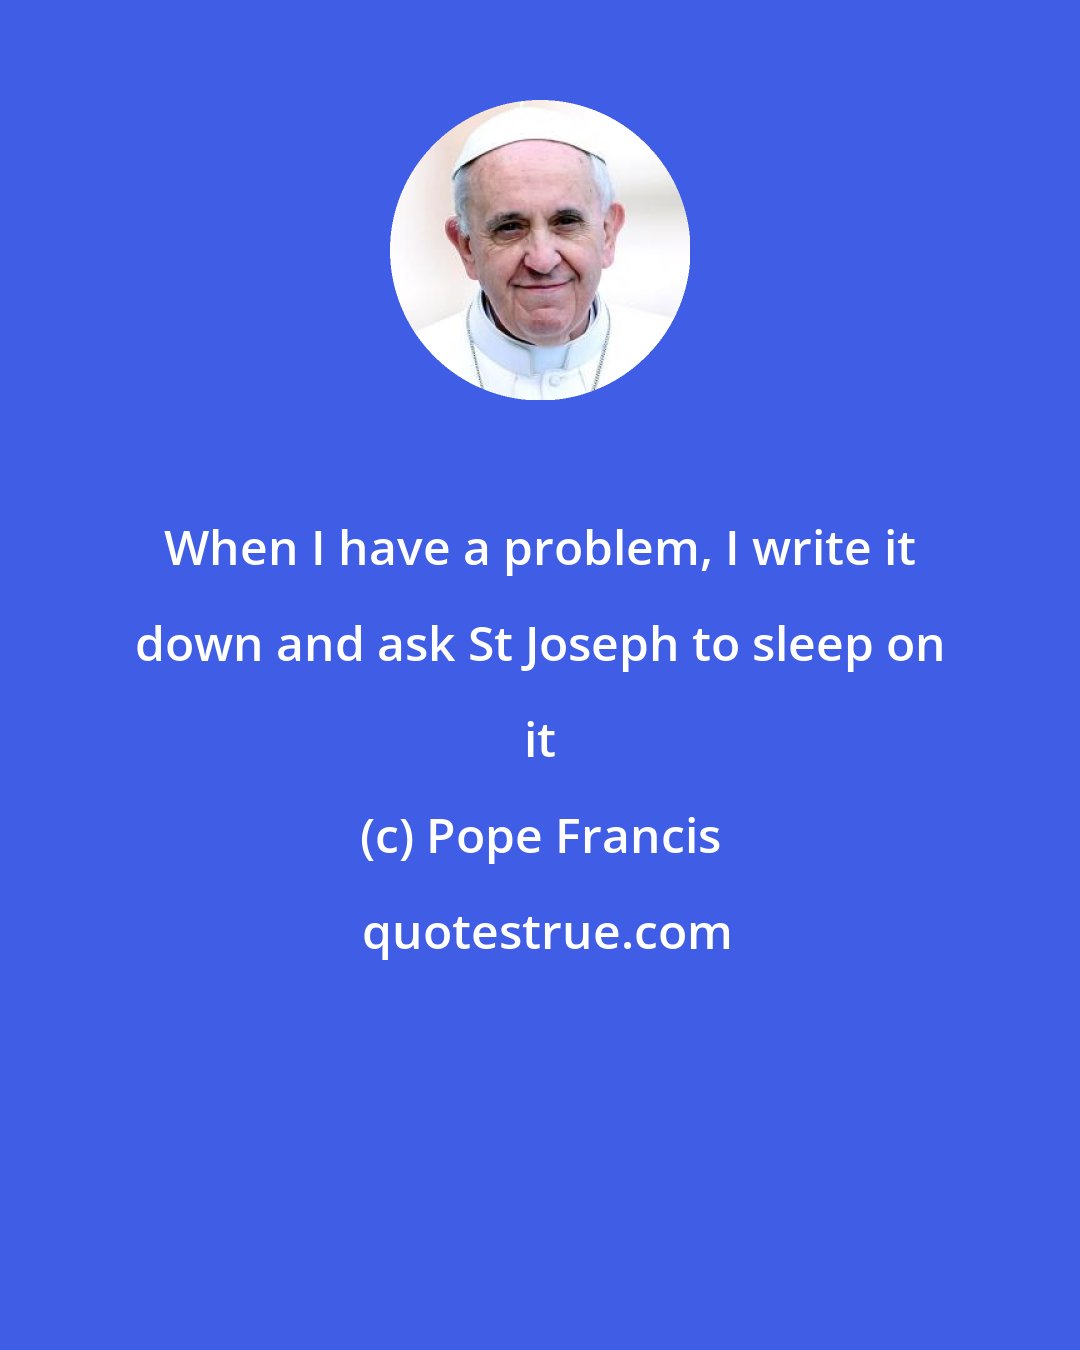 Pope Francis: When I have a problem, I write it down and ask St Joseph to sleep on it